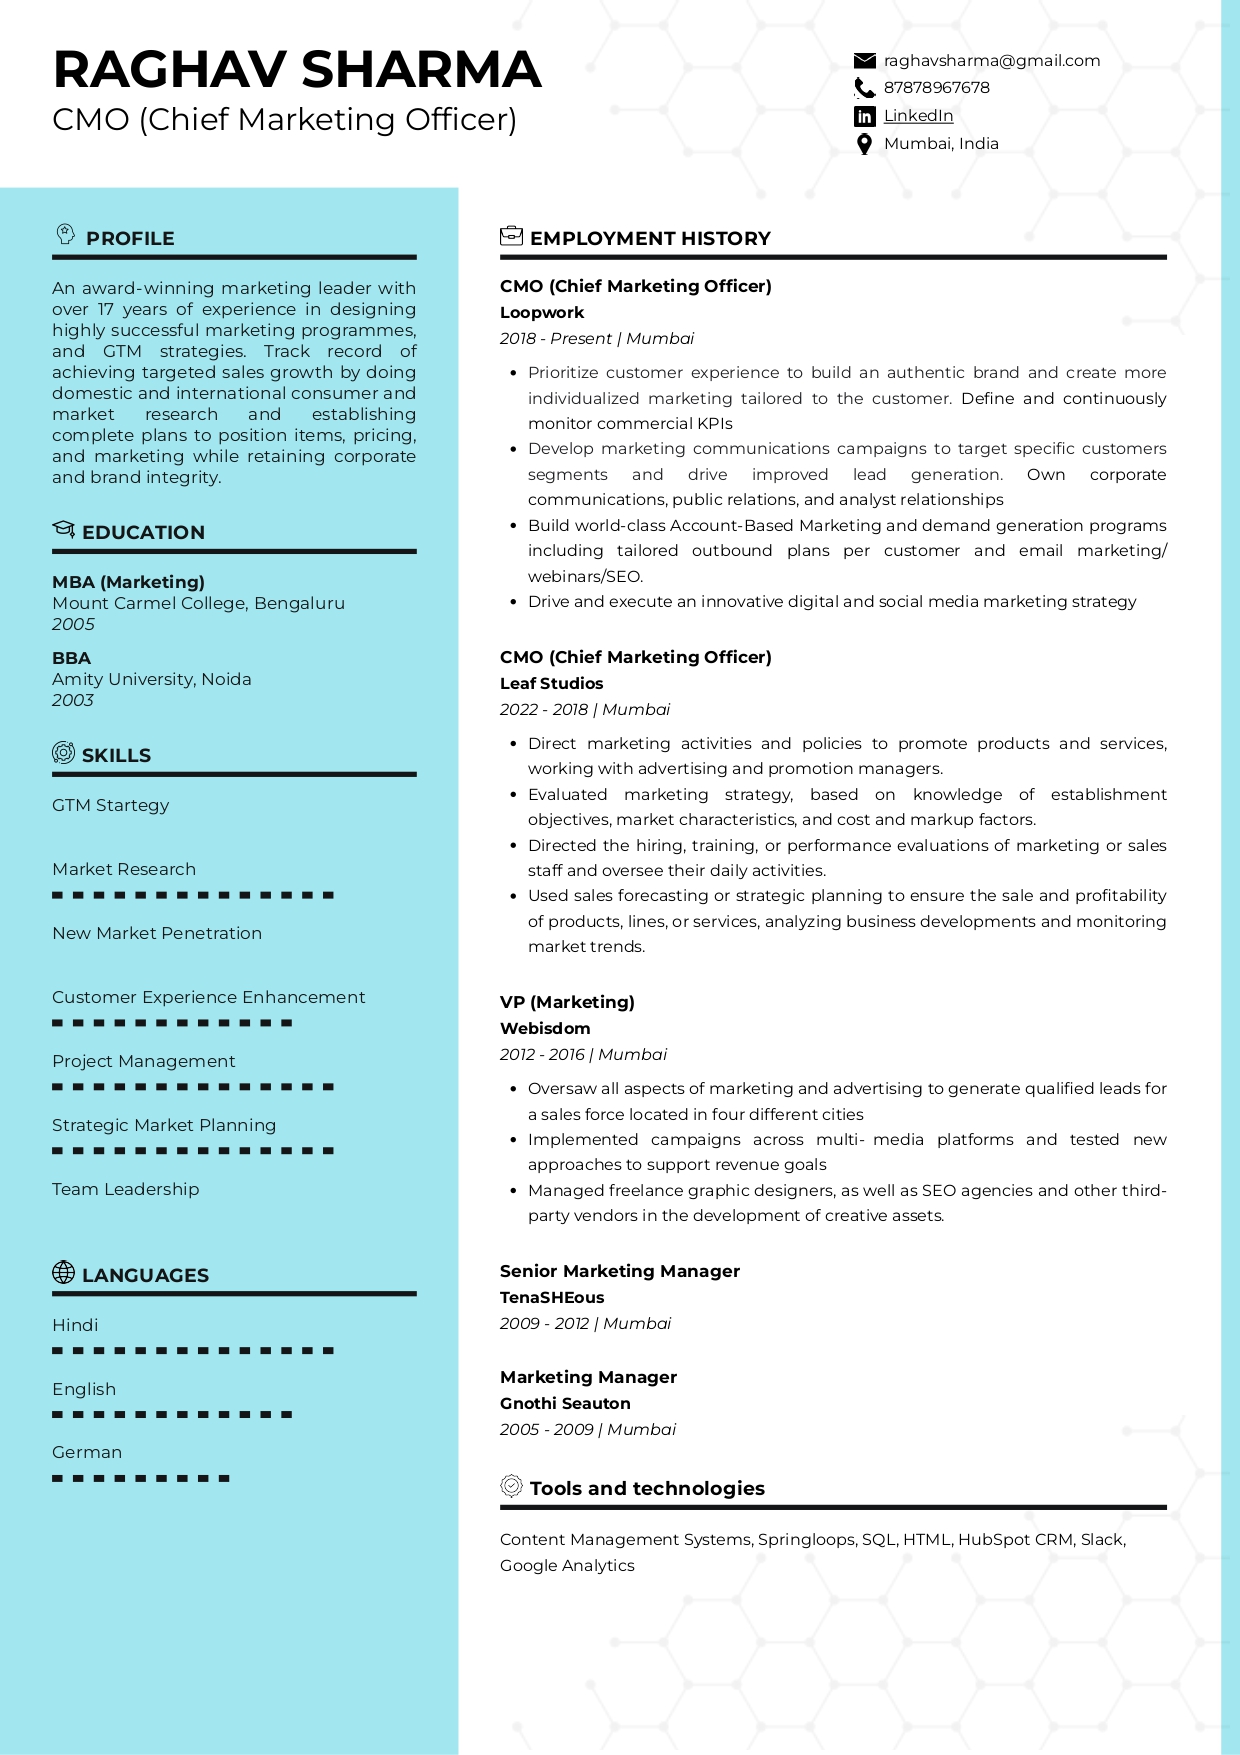 Resume of Chief Marketing Officer (CMO)